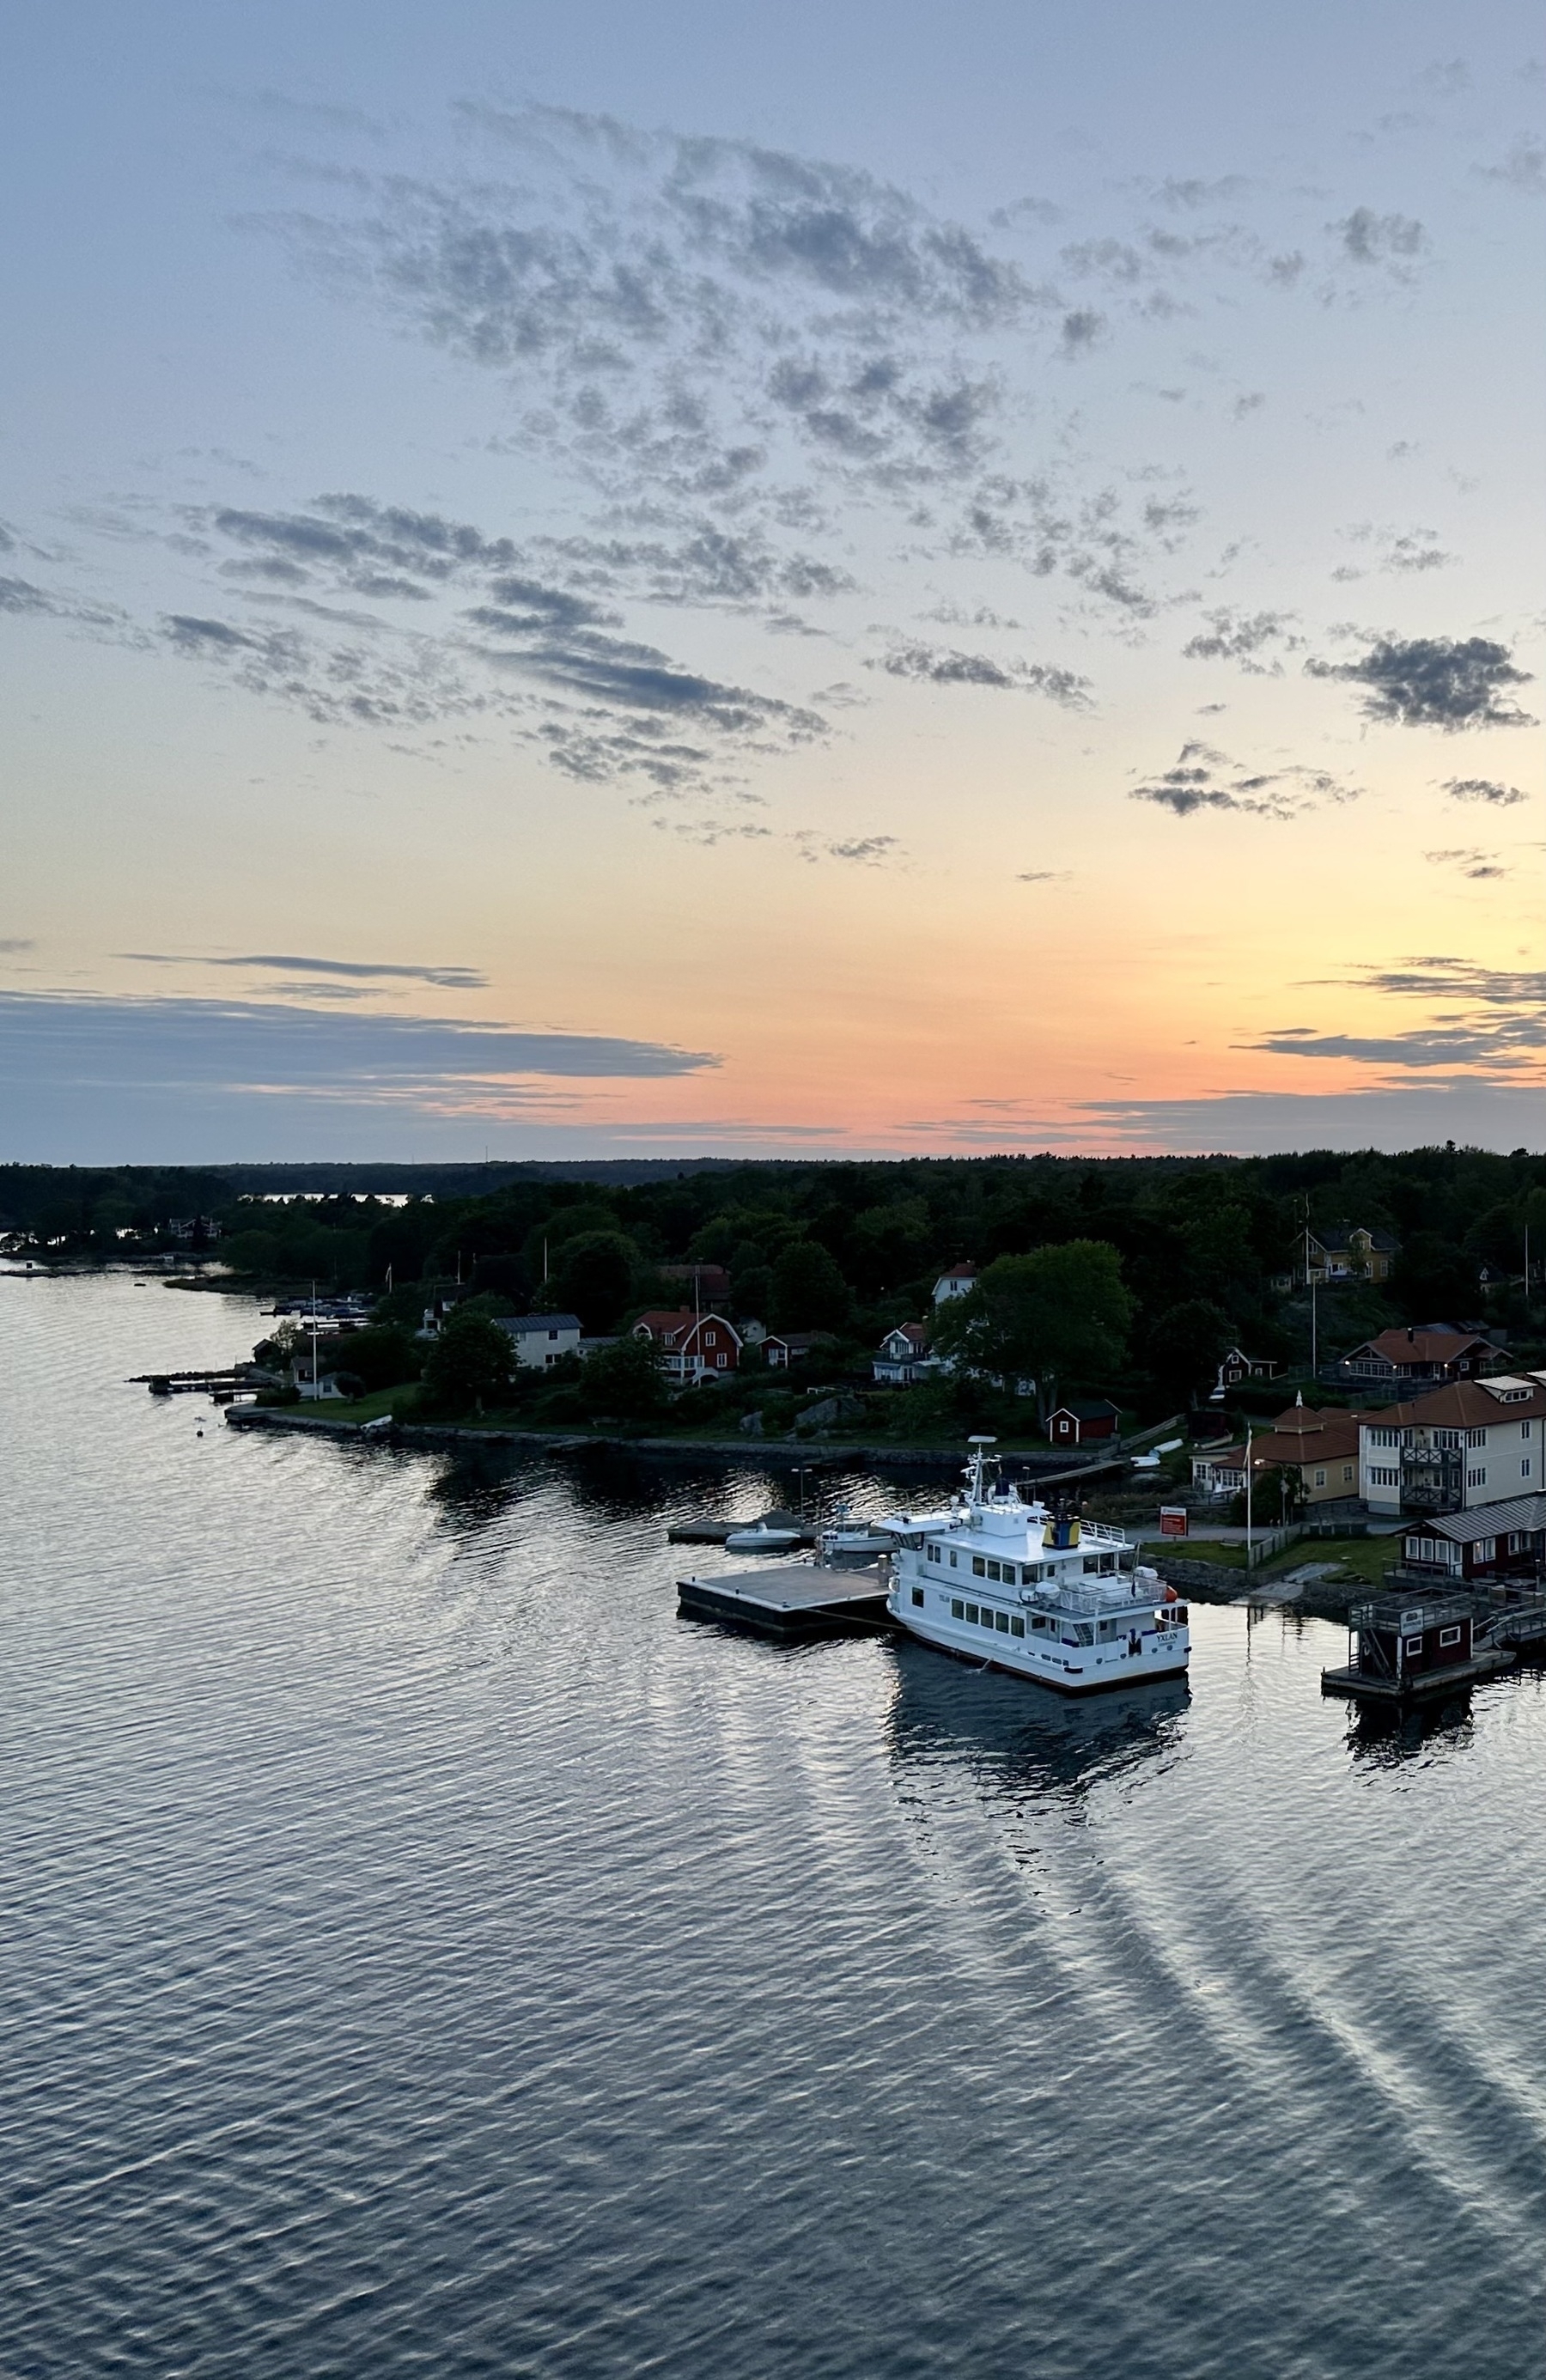 The coastline with boats at sunset, just outside Stockholm.